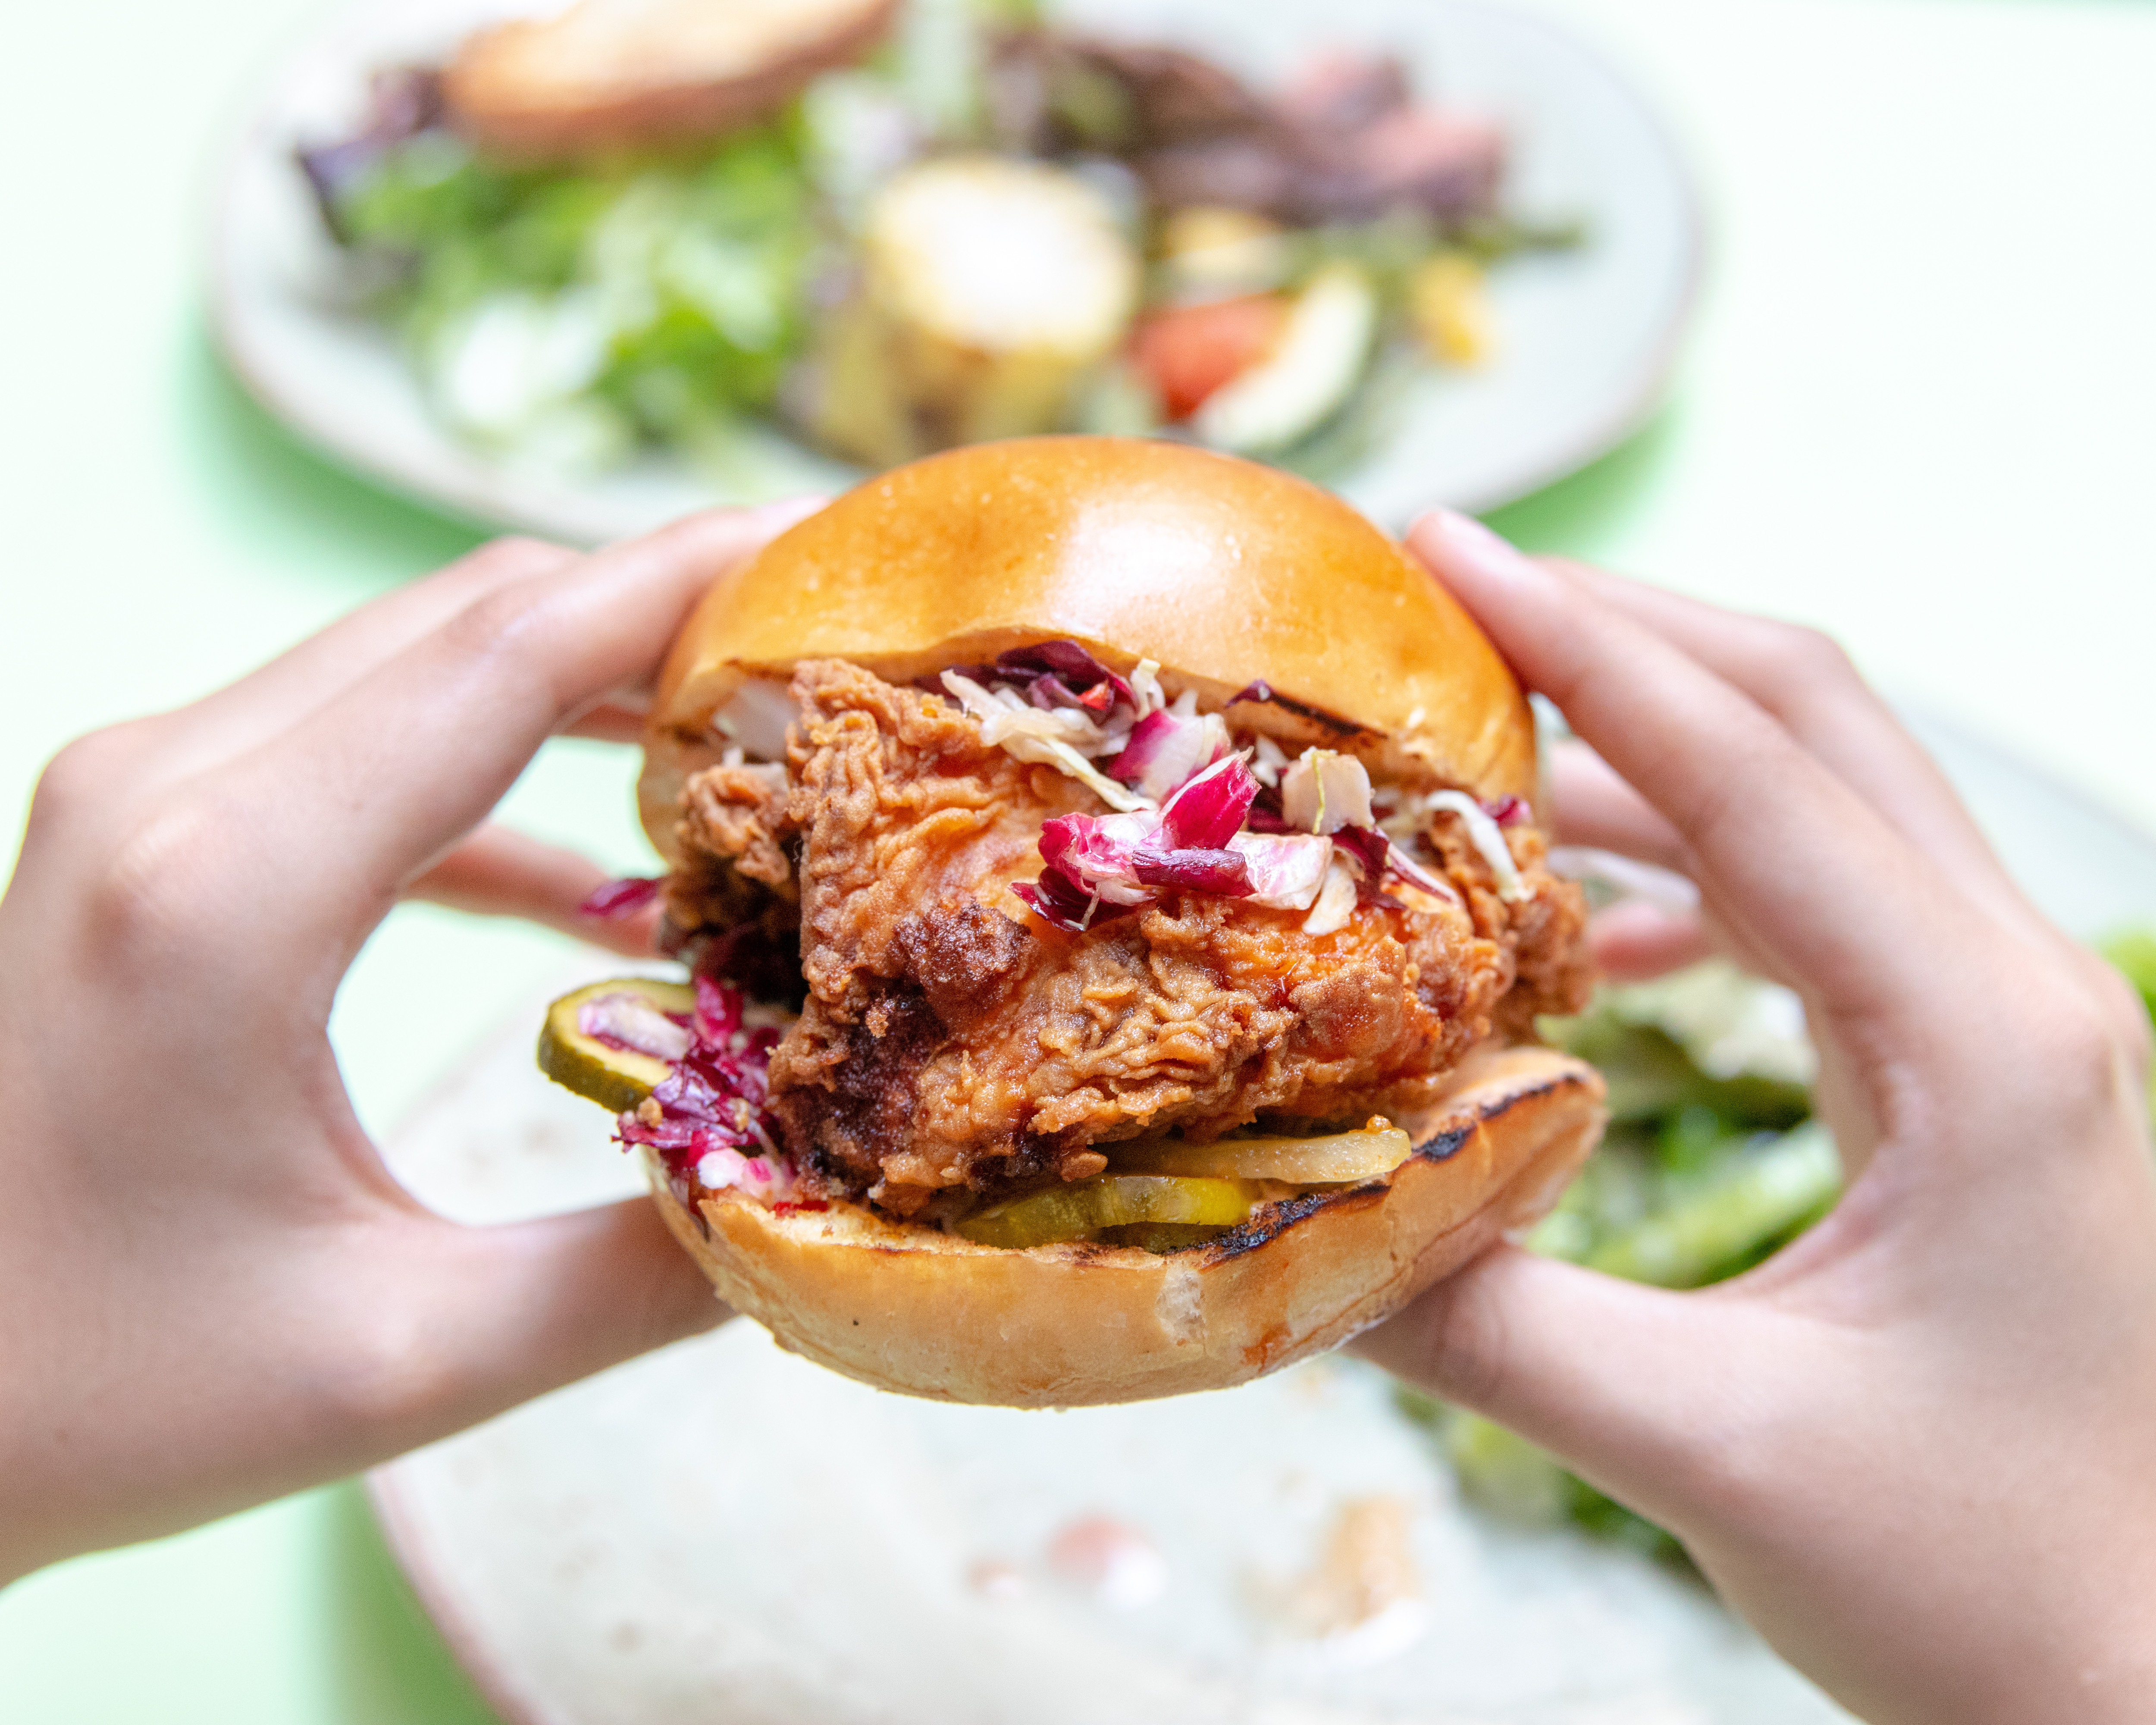 The fried chicken sandwich at Tender Greens